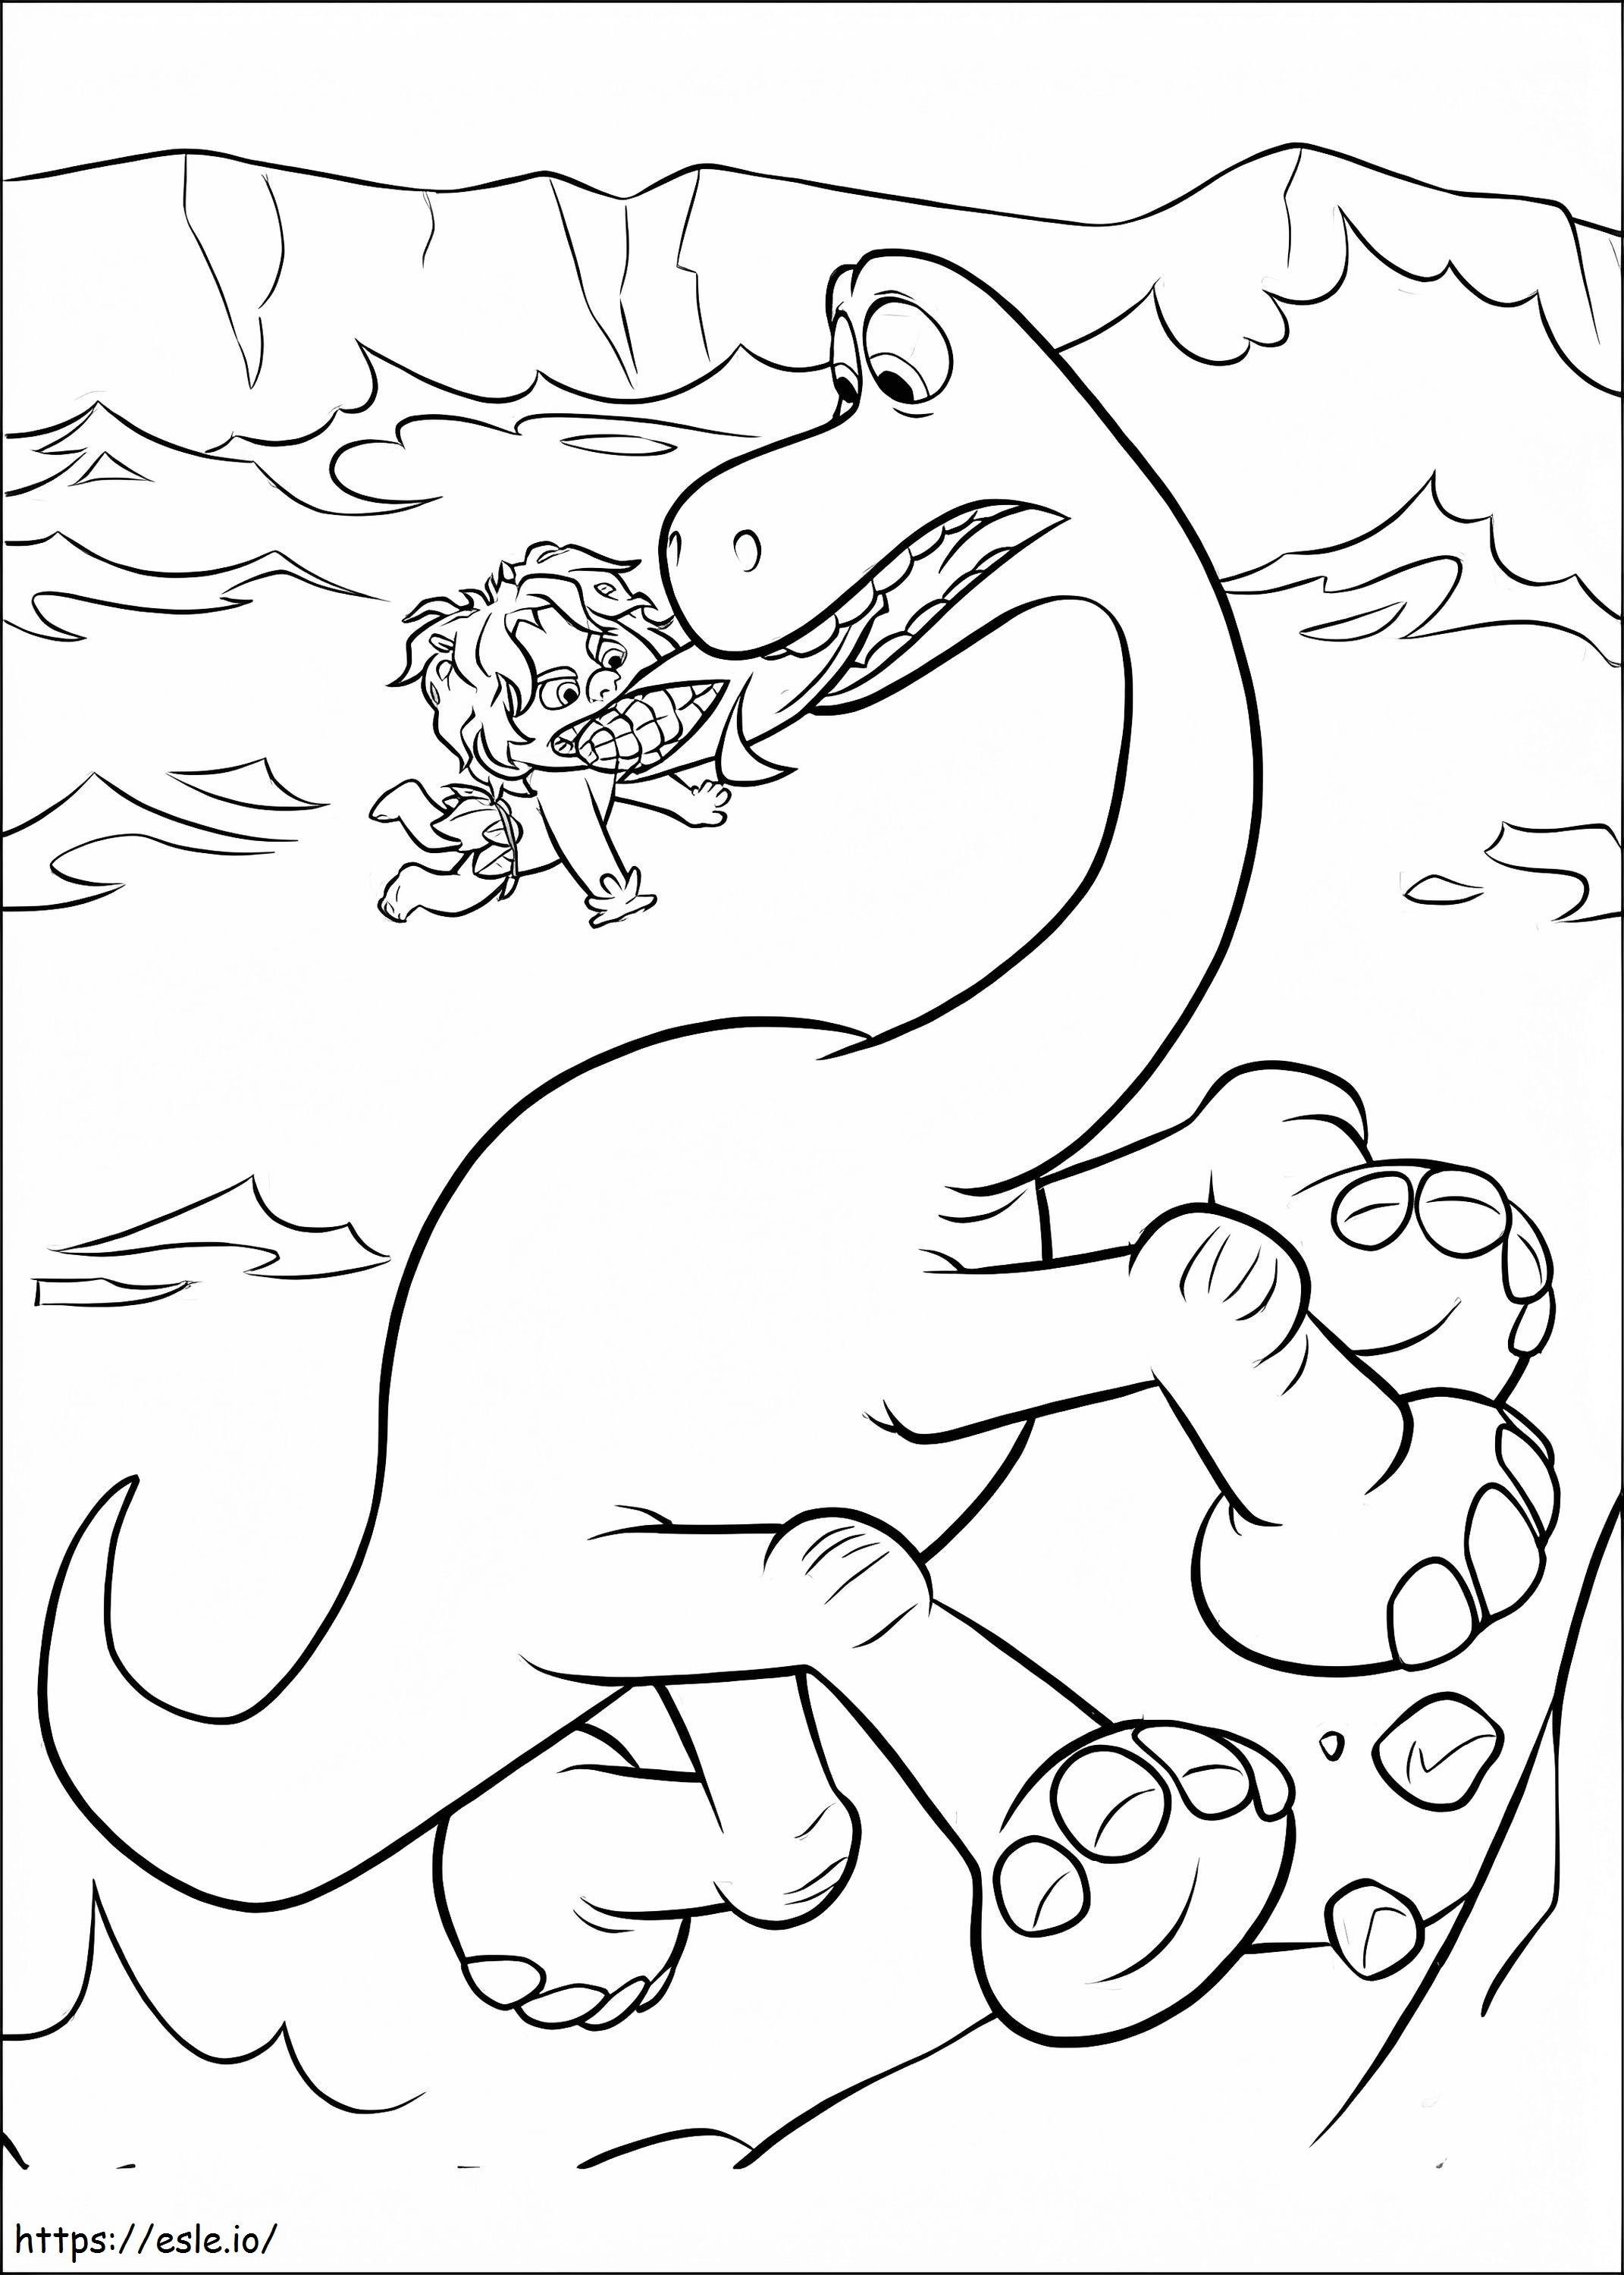 Spot Competes For Food With Arlo coloring page